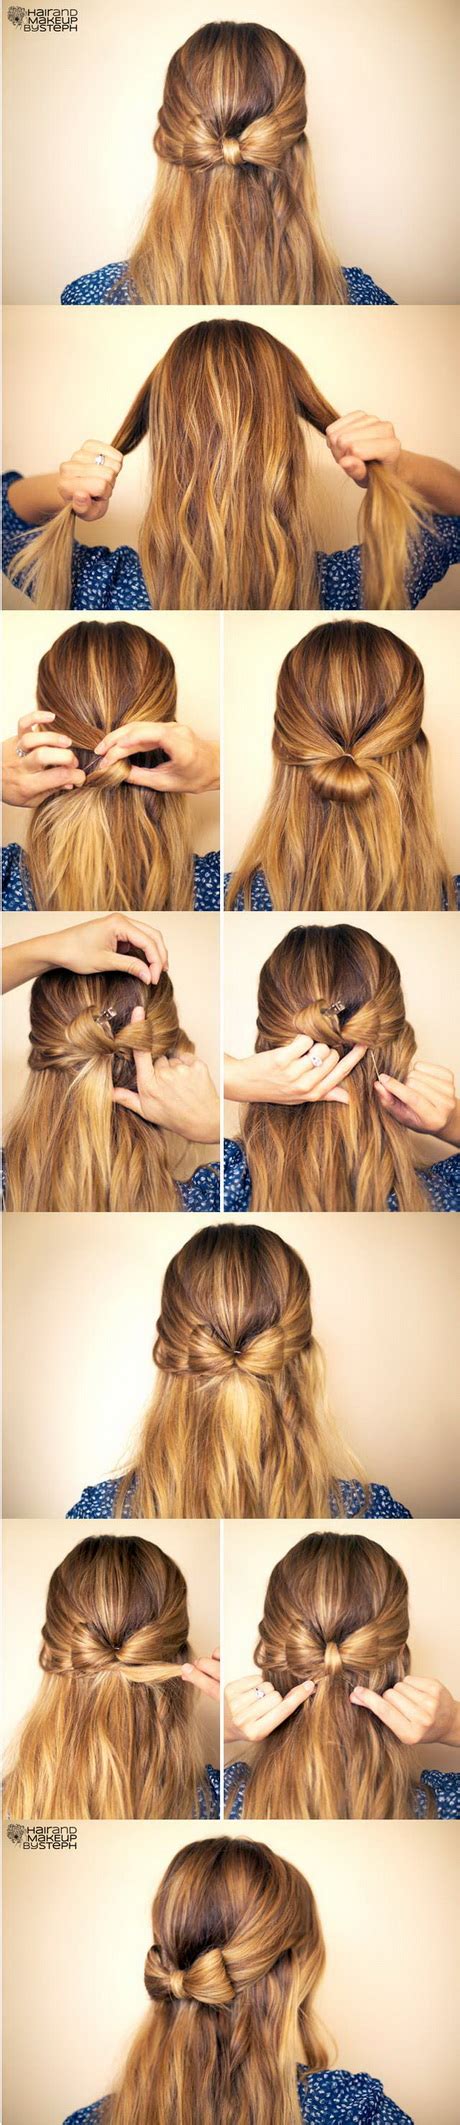 Best braided hairstyles for girls. Easy step by step hairstyles for long hair